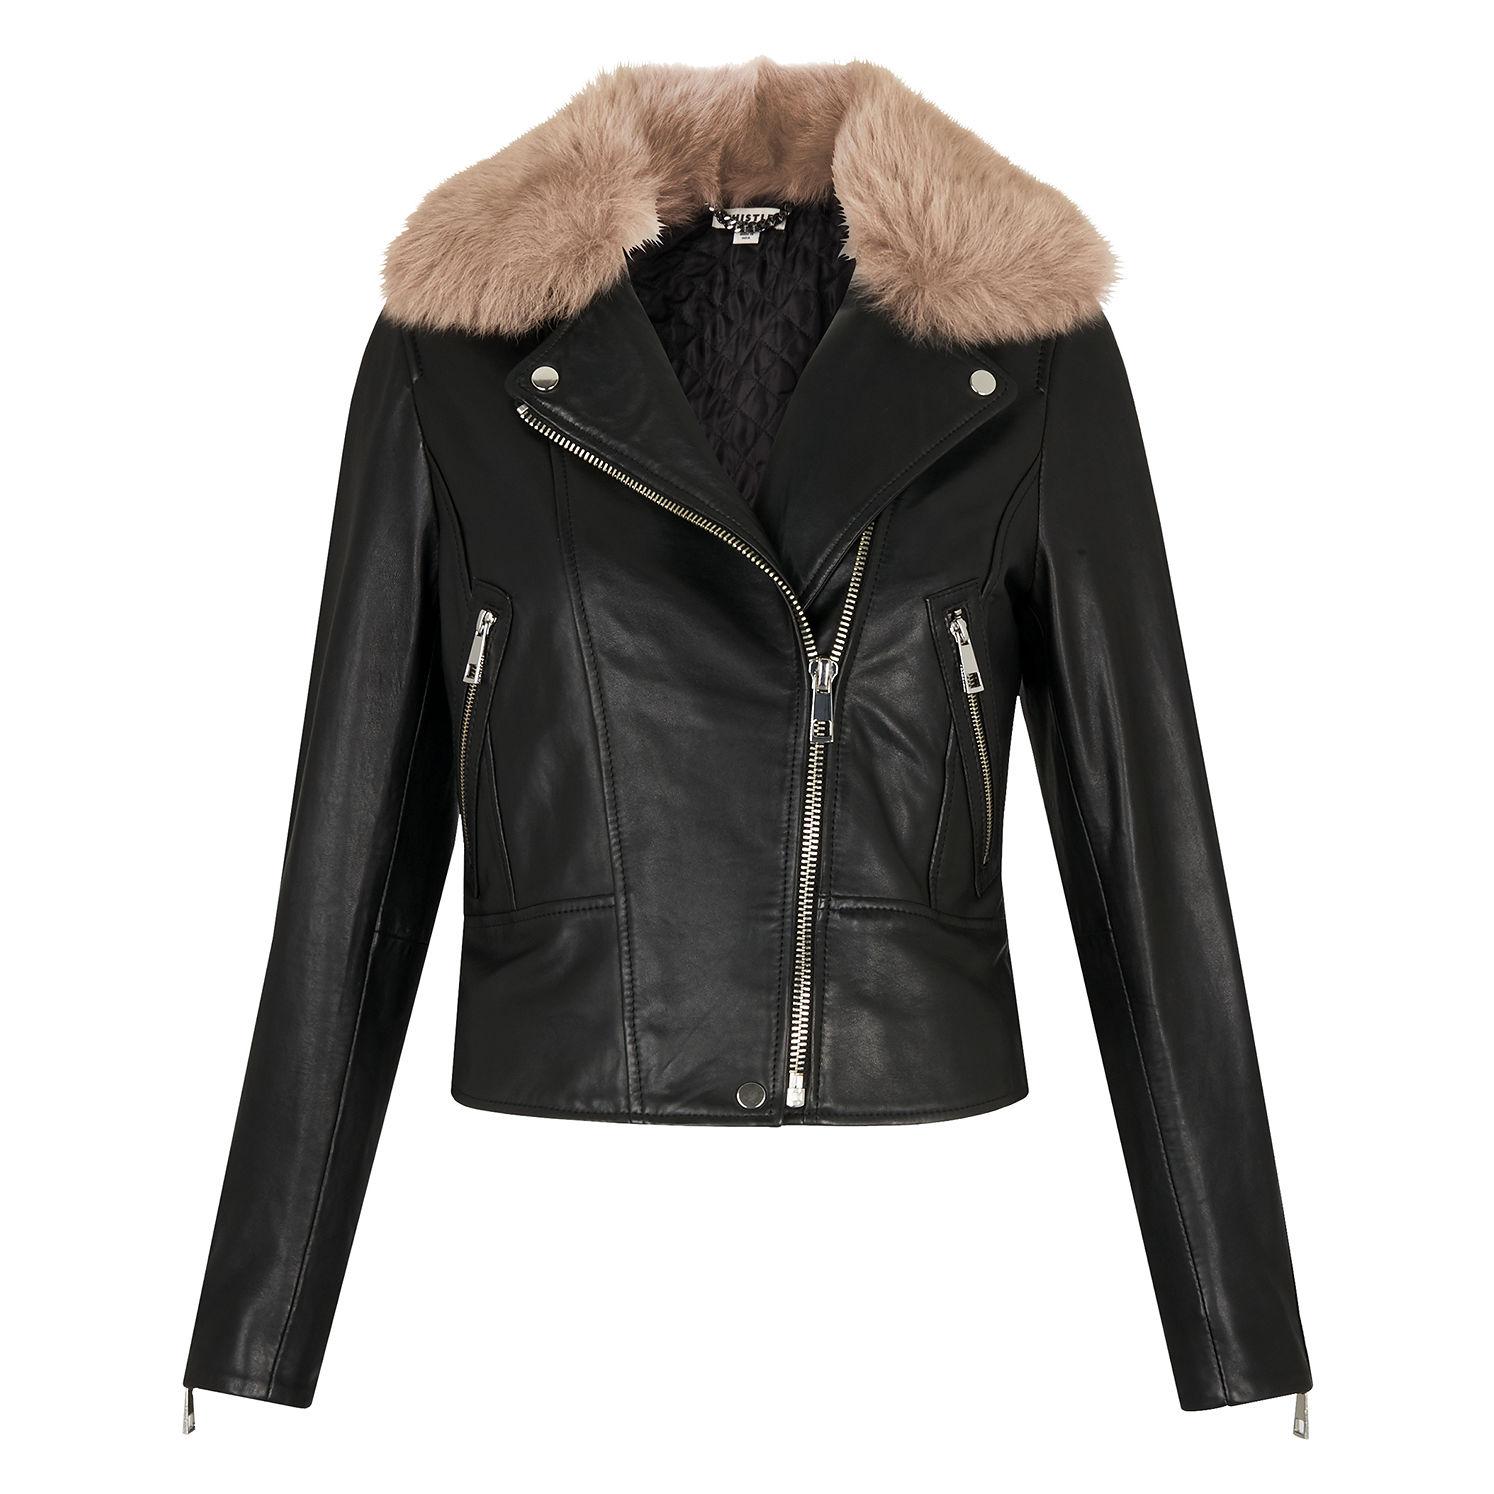 Lyst - Whistles Toscana Collar Leather Jacket in Black - Save 90%